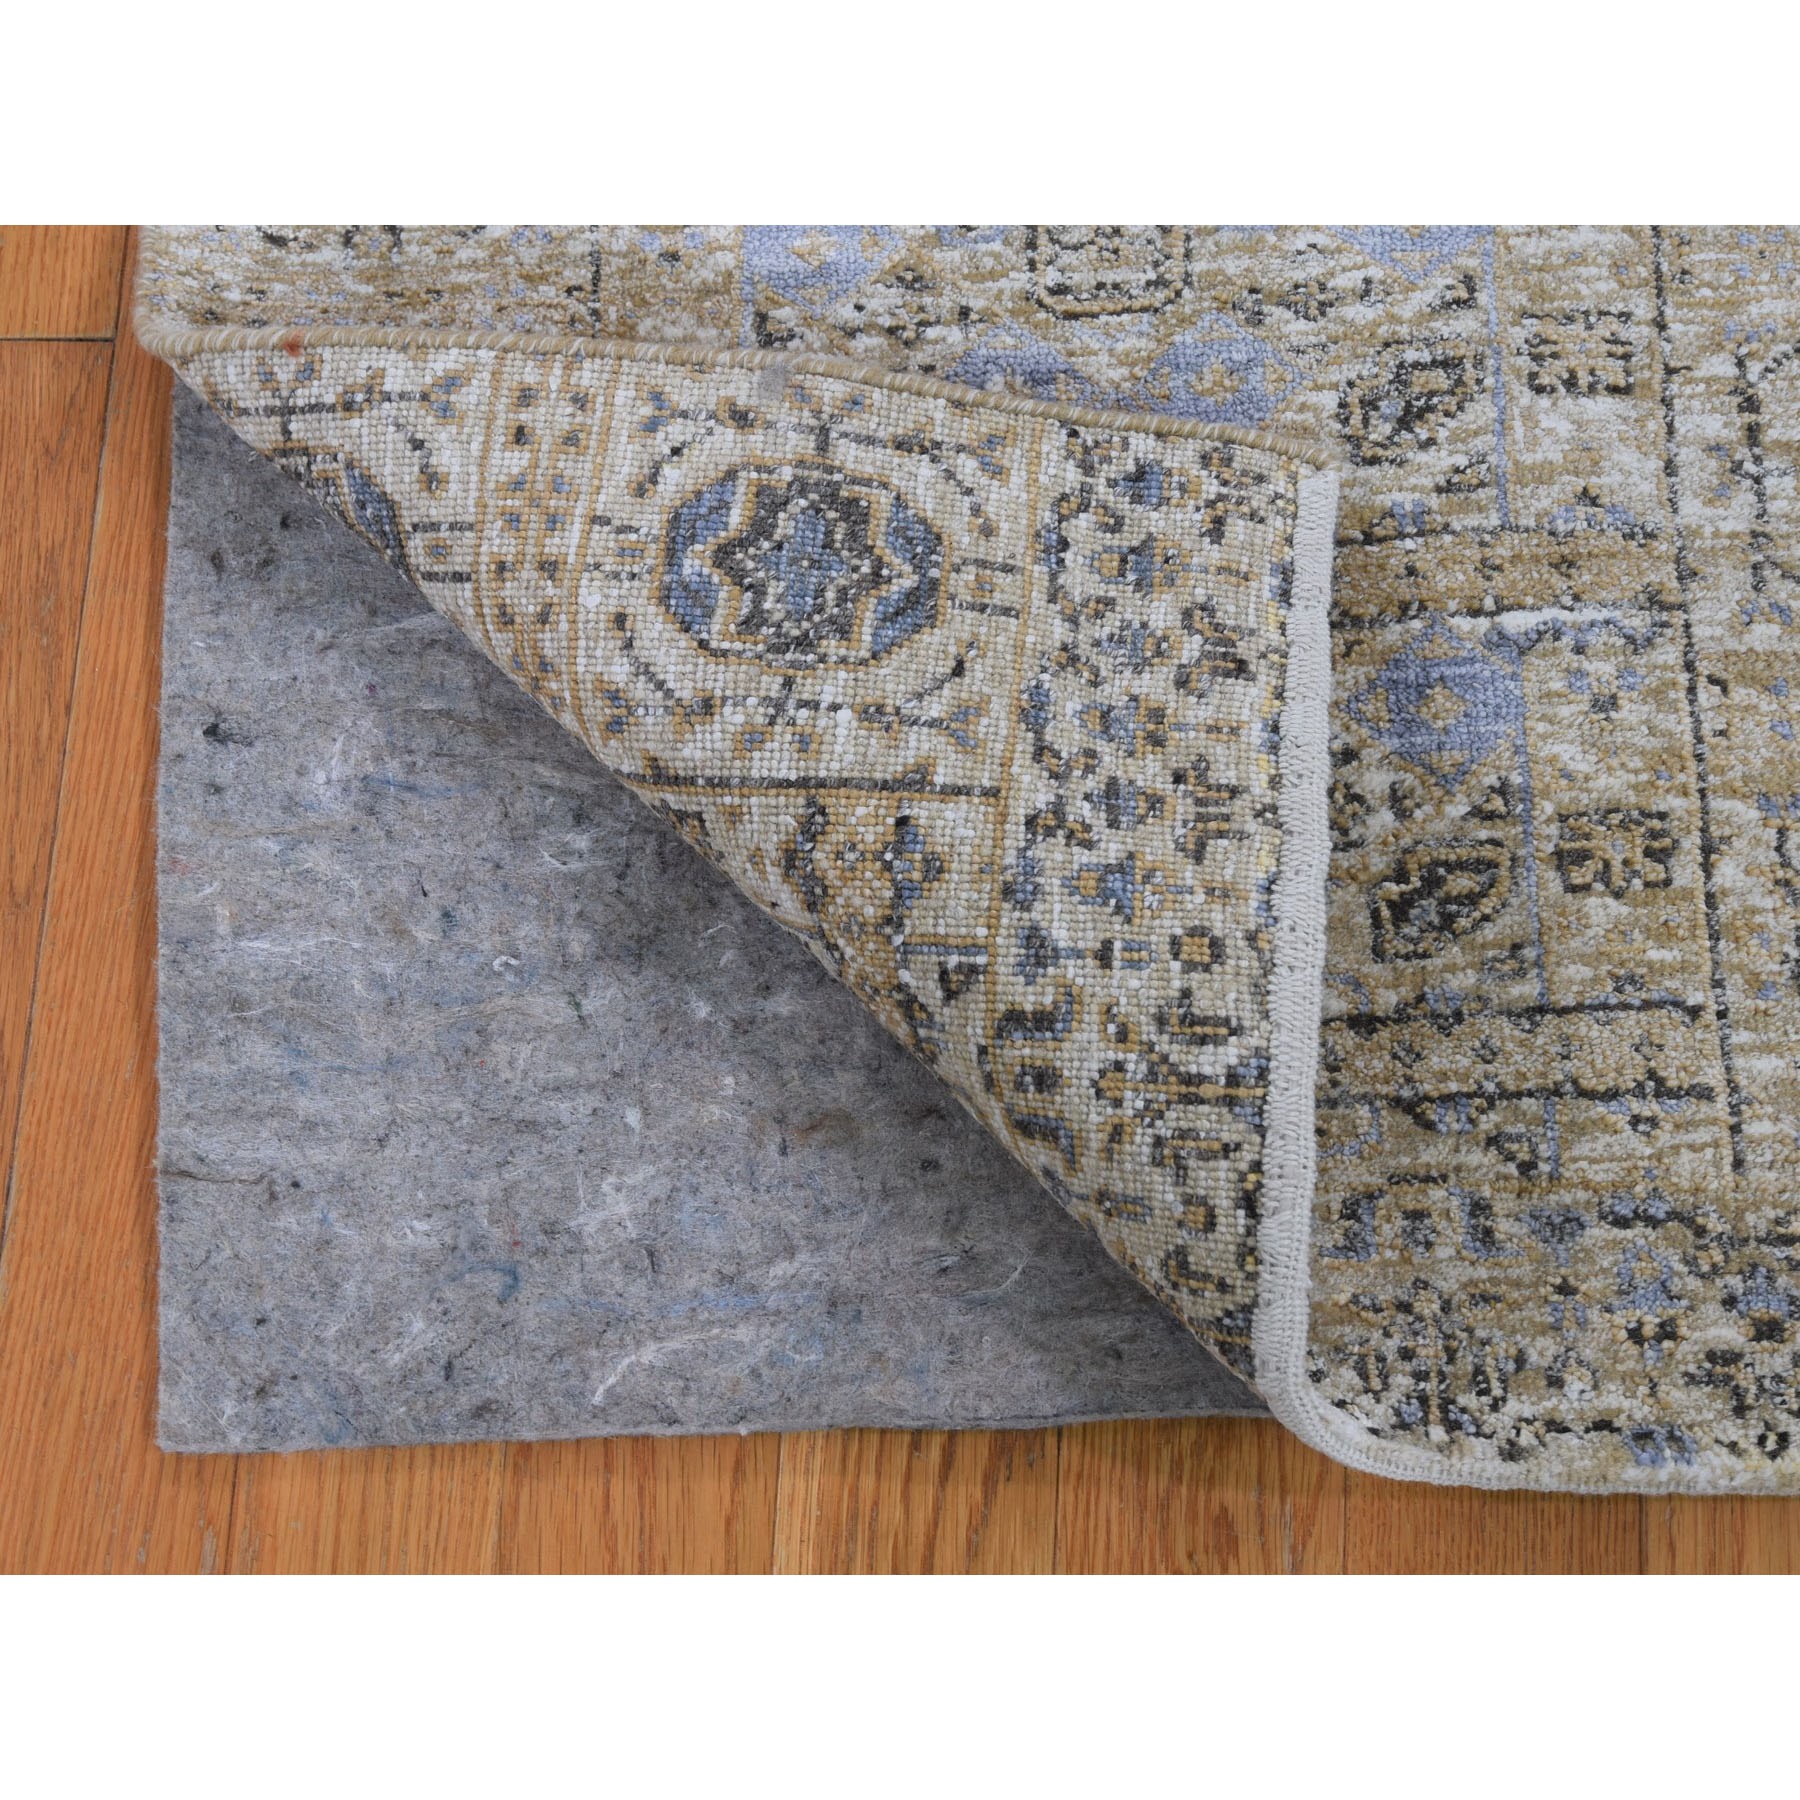 2-2 x3-1  Sampler Silver Silk With Textured wool Mamluk Design Hand knotted Oriental Rug 